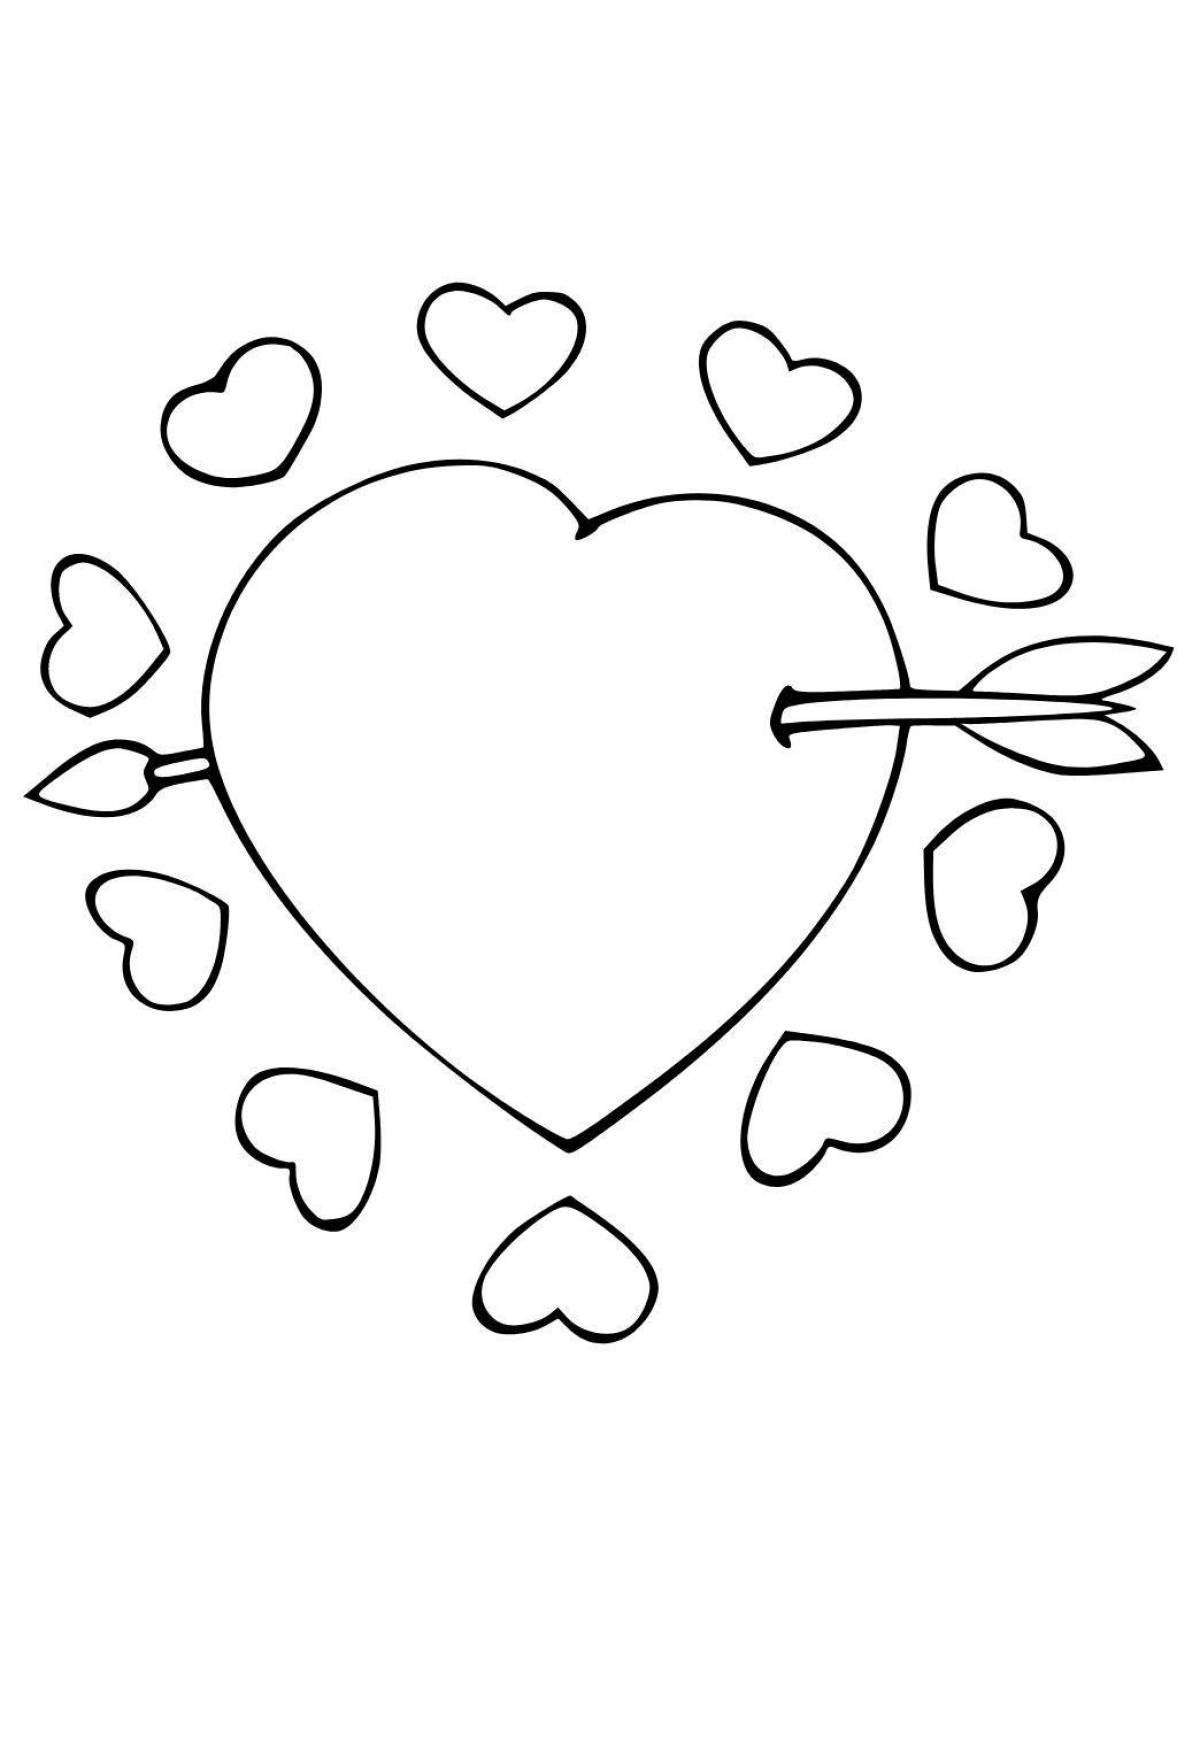 Playful heart and star coloring page